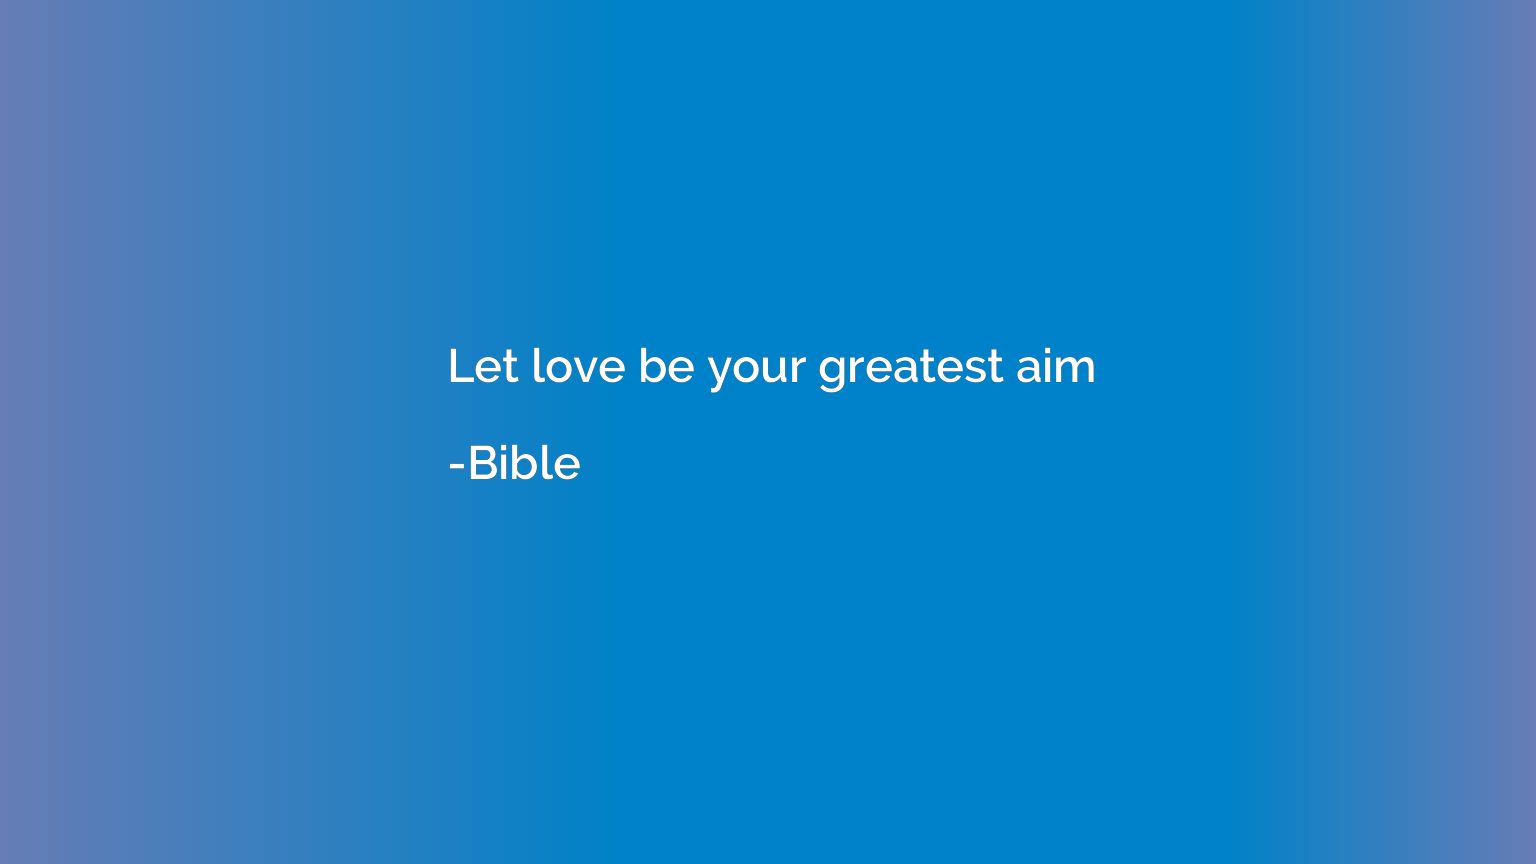 Let love be your greatest aim